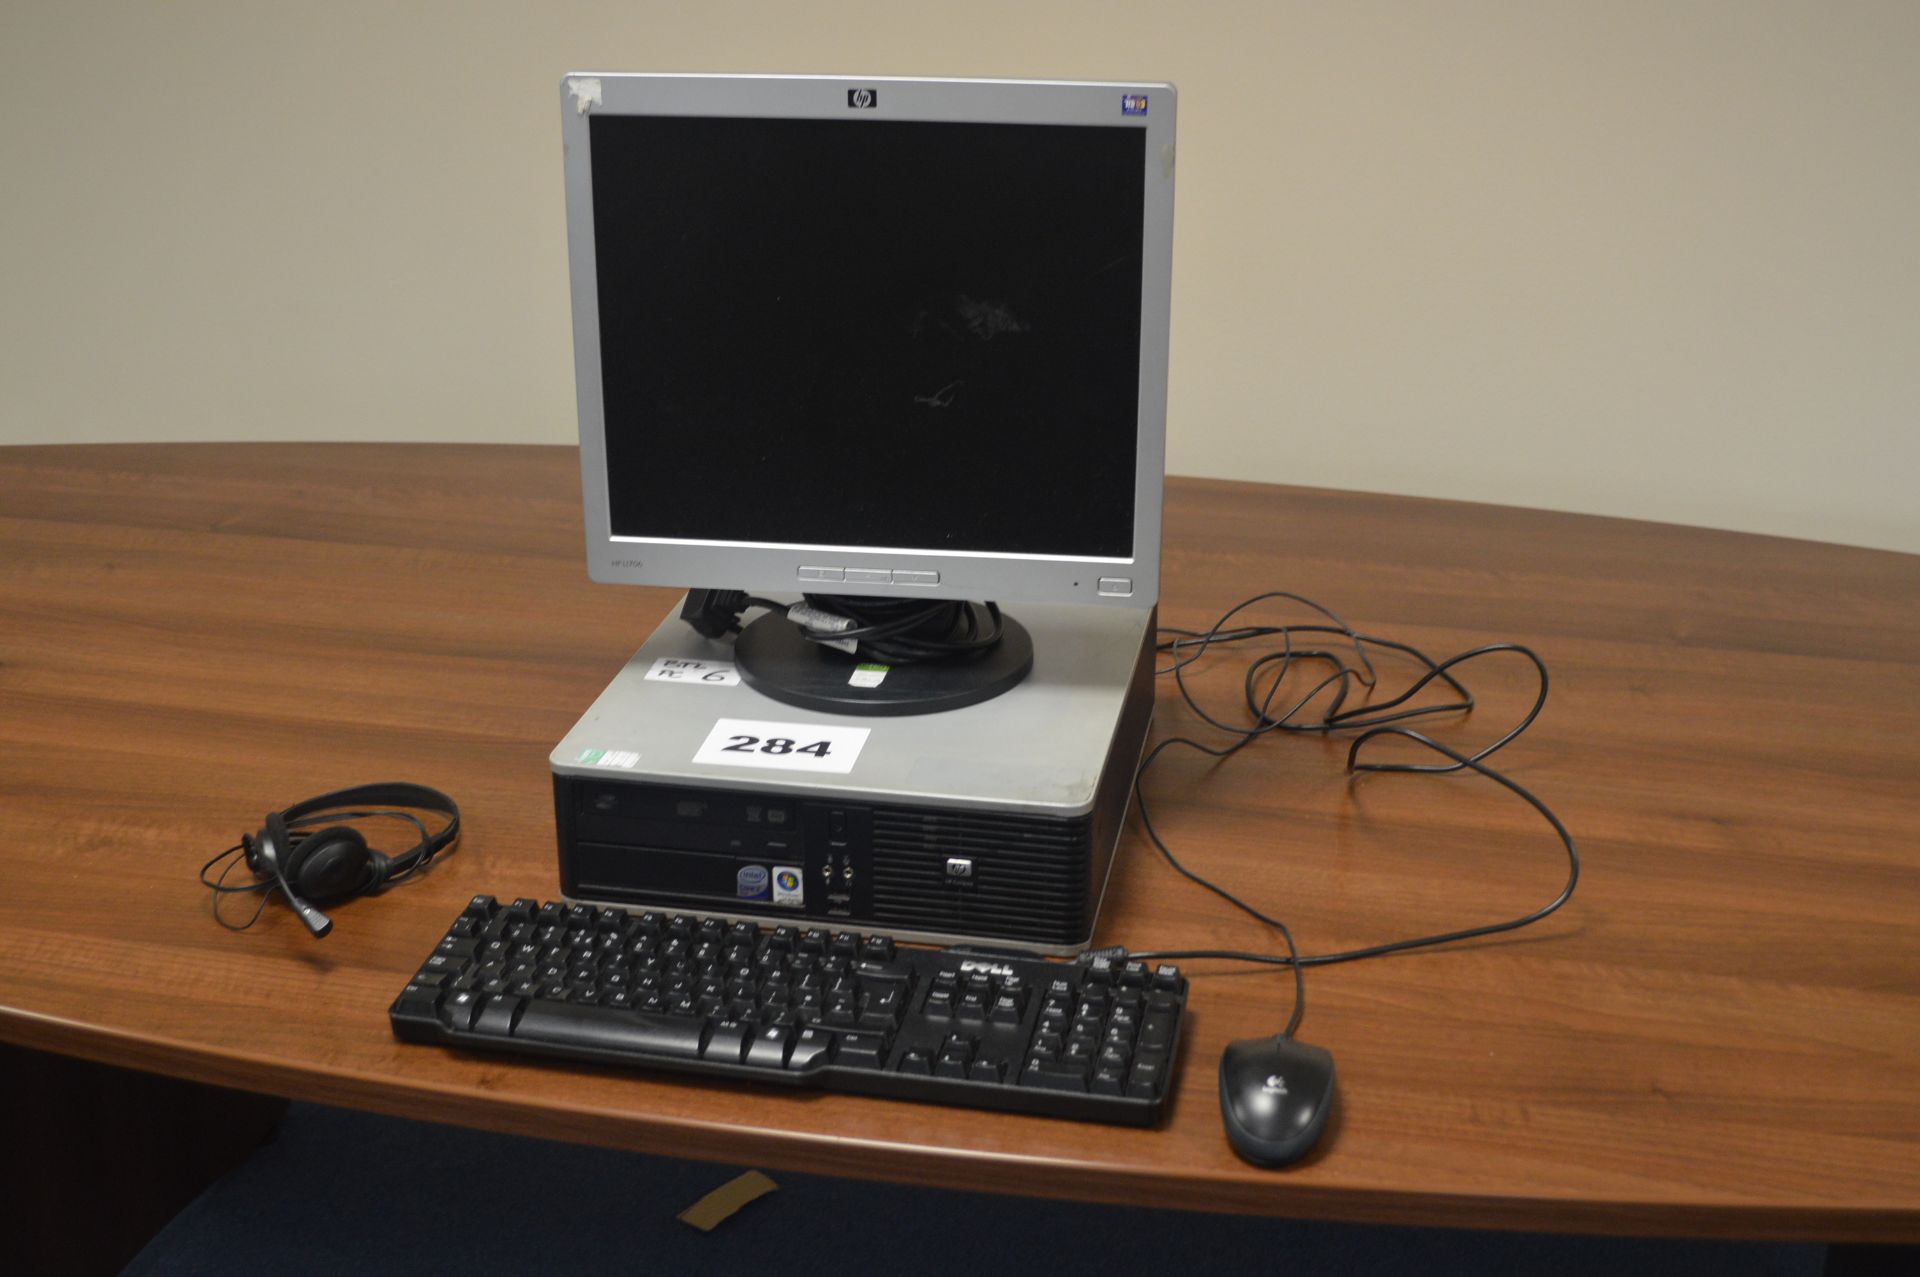 Hp Compaq DC7900 Intel Core 2 Duo personal computer with keyboard, monitor, mouse, headphones.